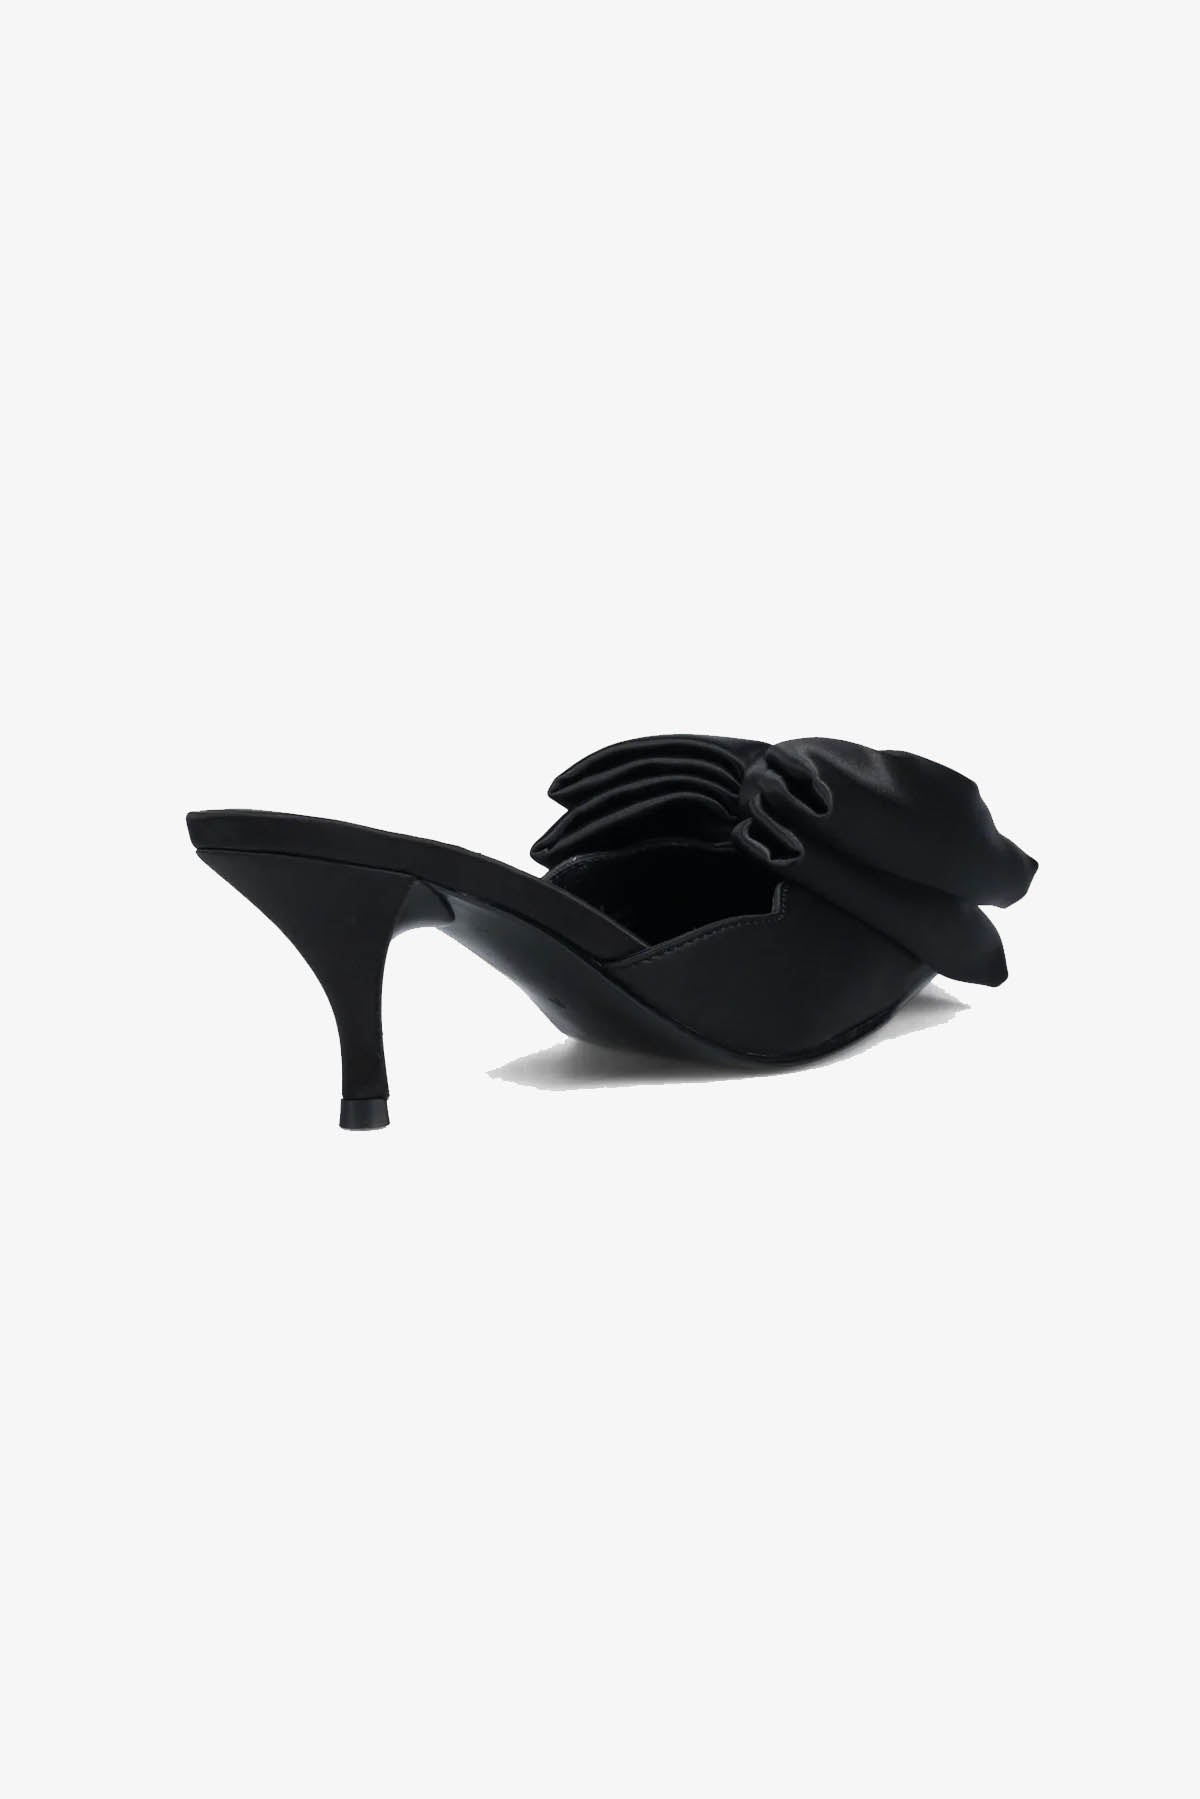 JEFFREY CAMPBELL CALZATURE  Scarpa Jeffrey Campbell Nera con Fiocco Ribbons